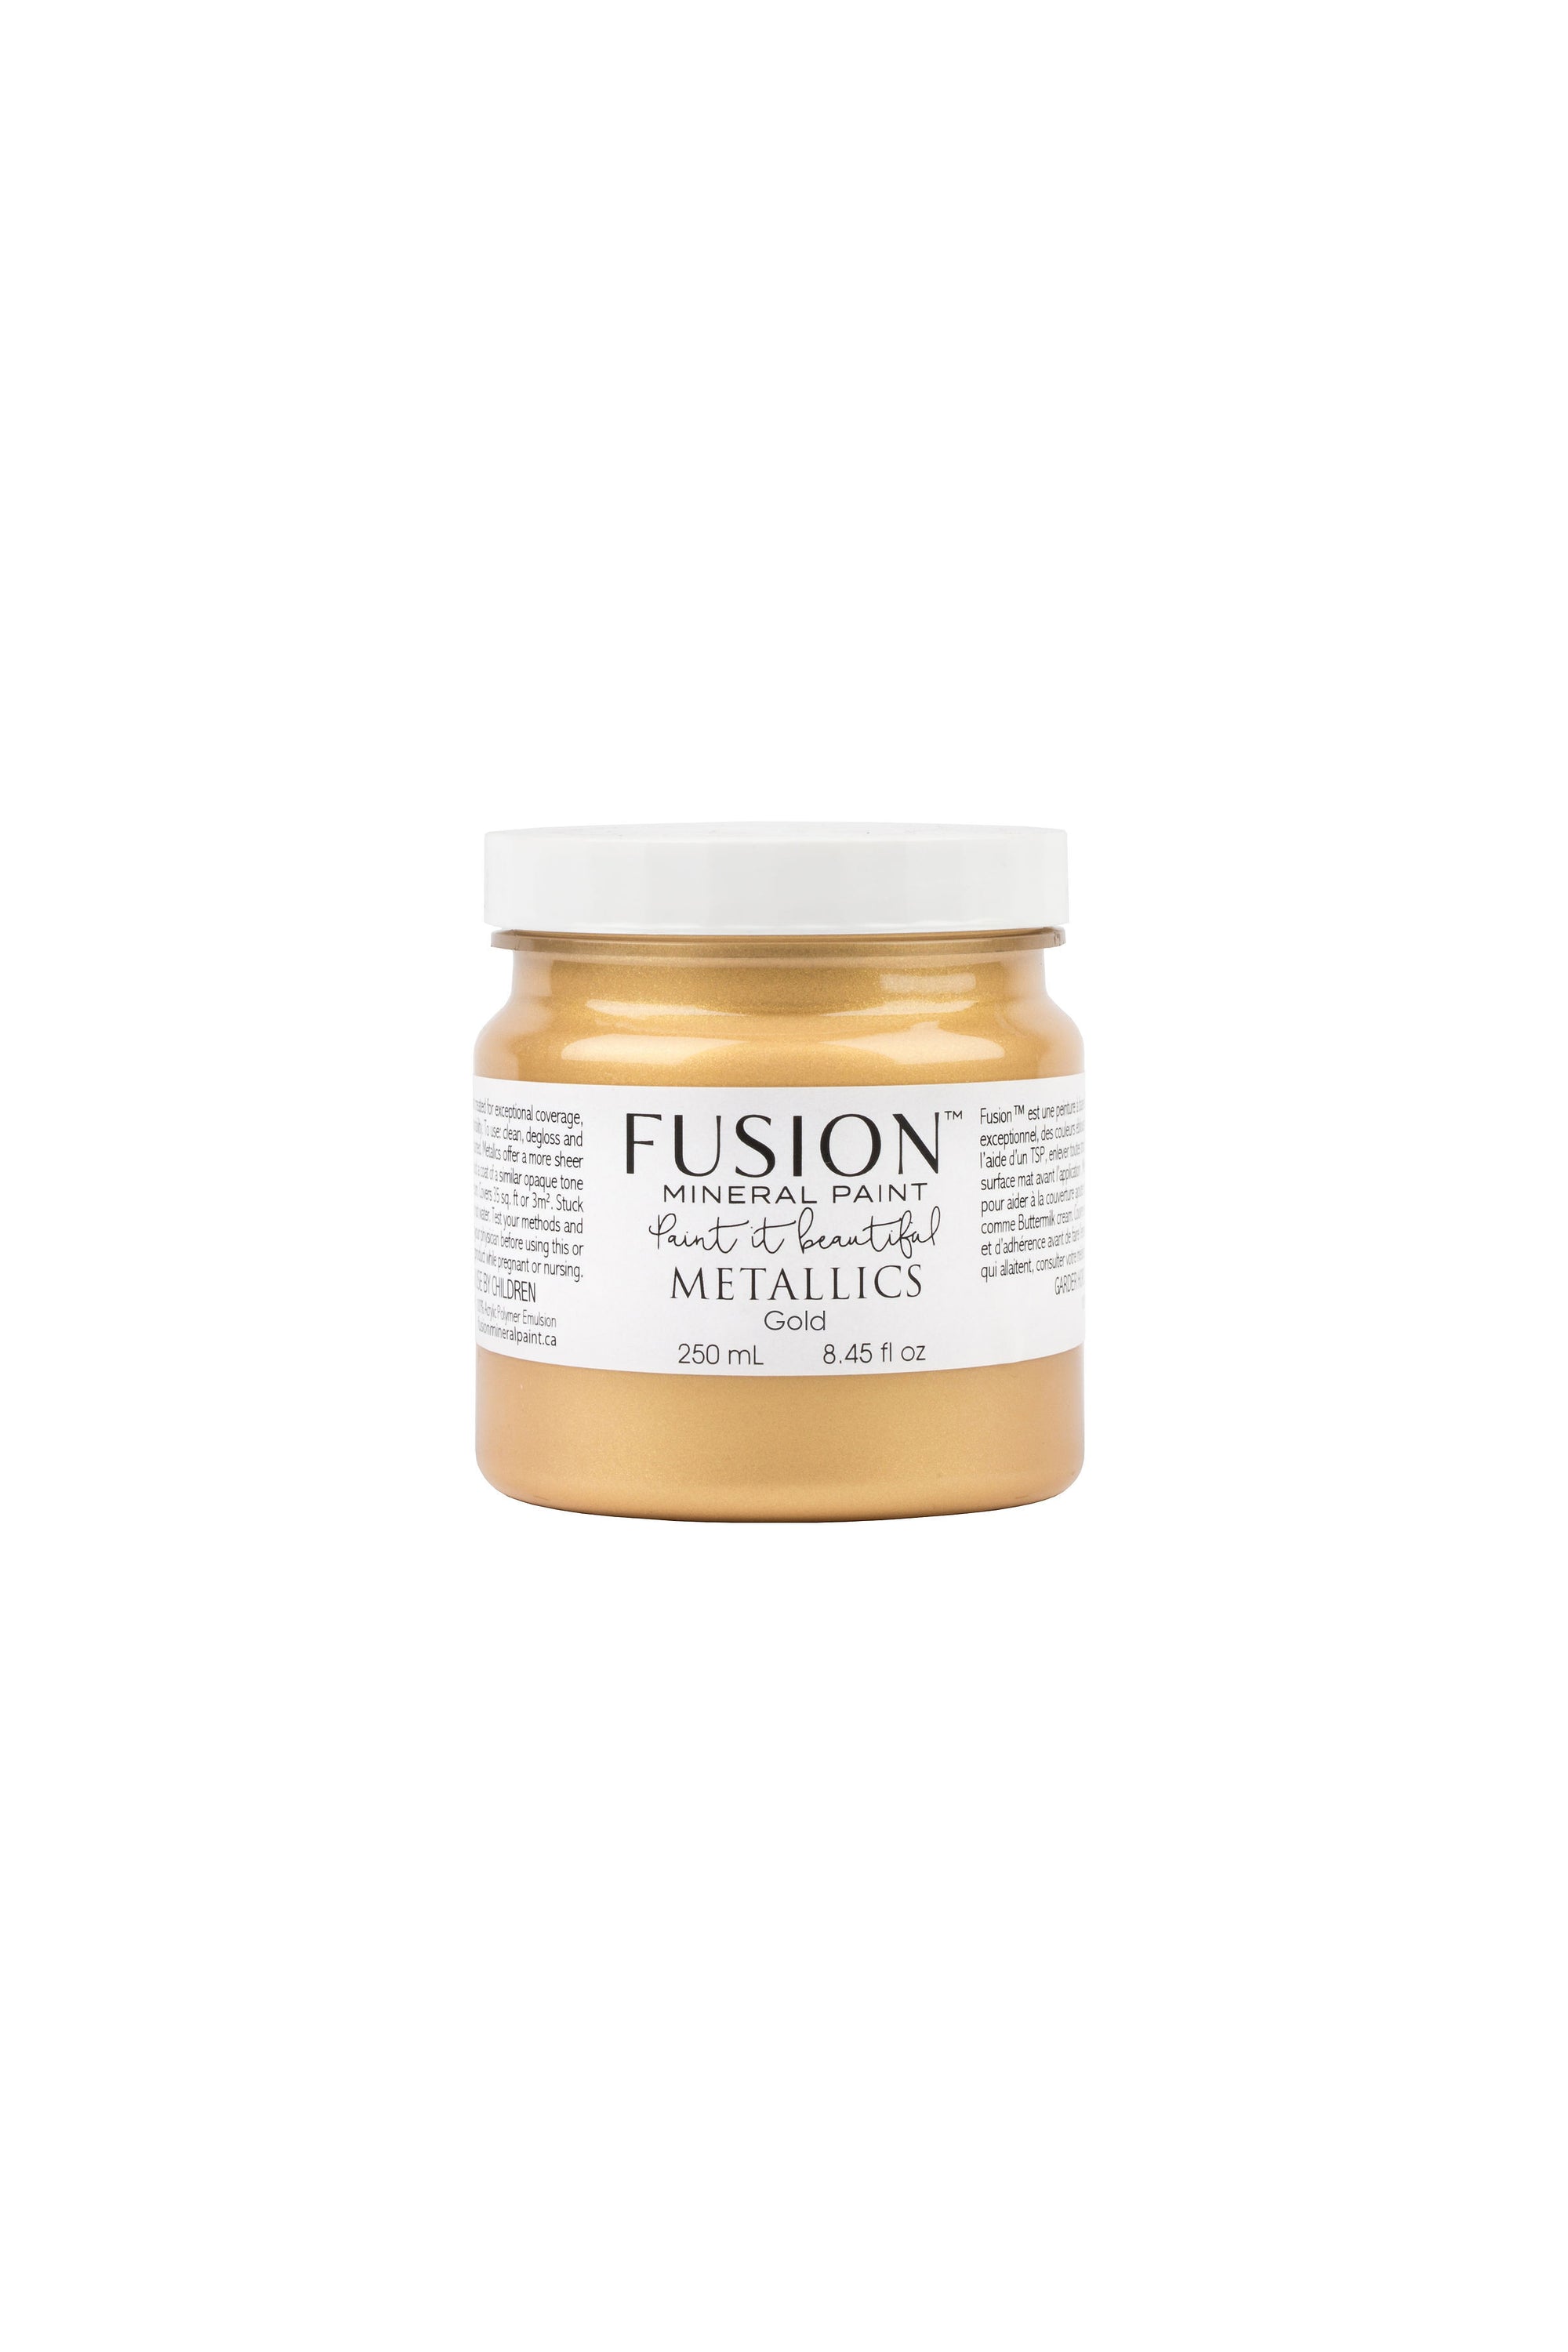 Fusion Mineral Paint - Rose Gold Metallic - 37 ml